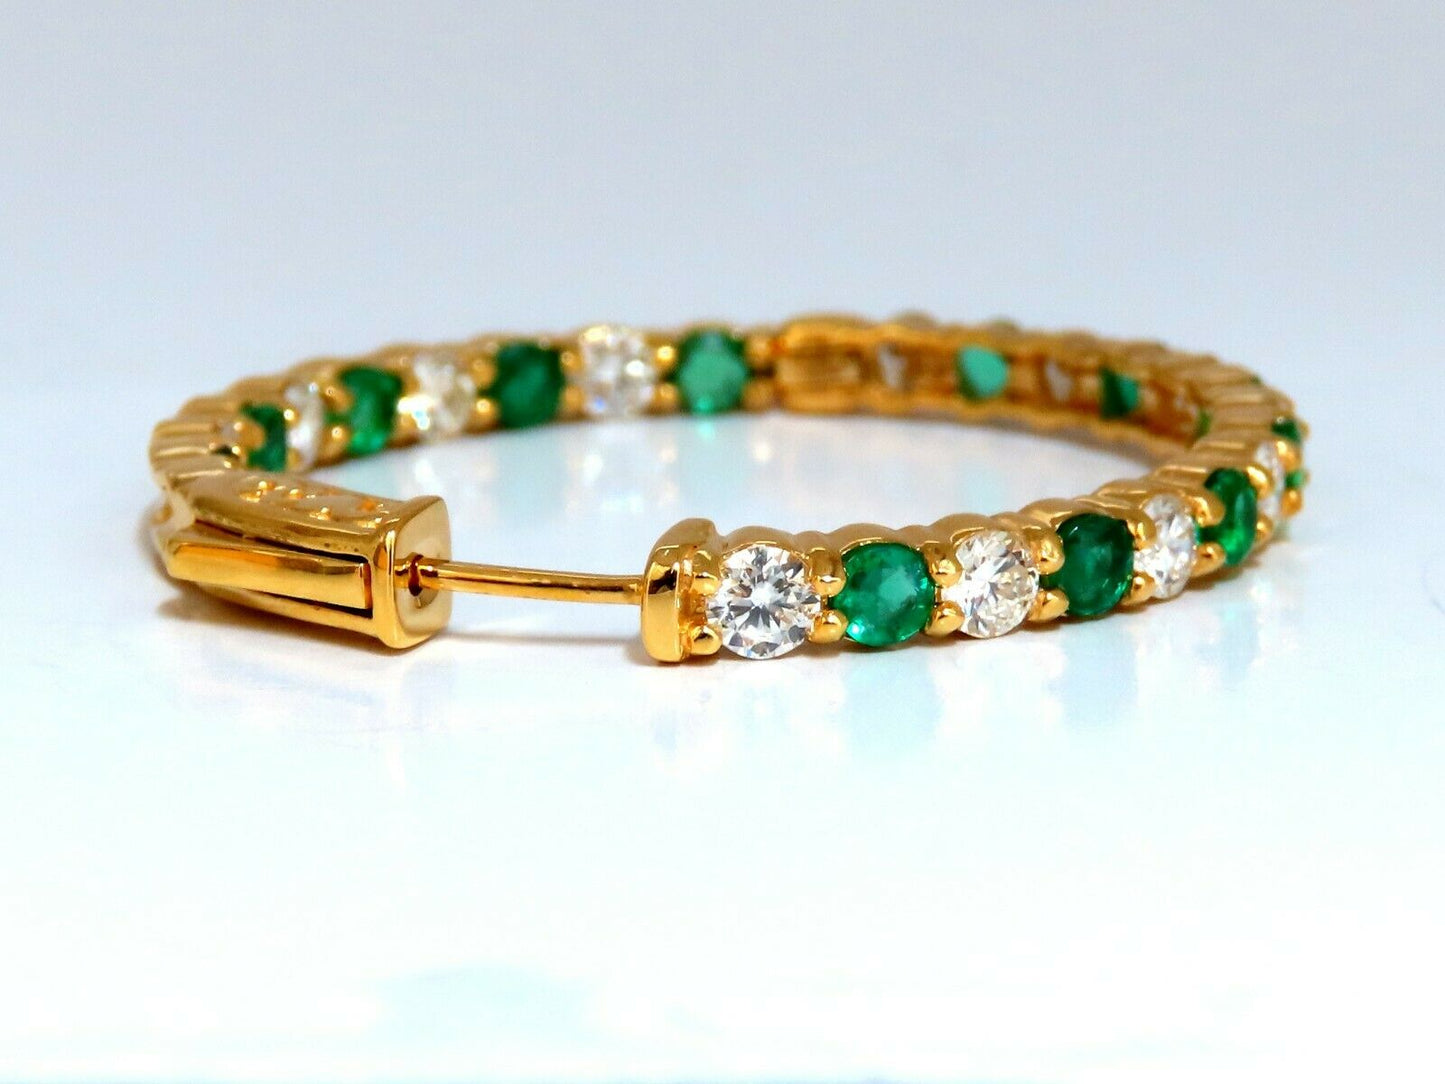 3.77ct natural emerald diamonds hoop earrings 14kt yellow gold inside out